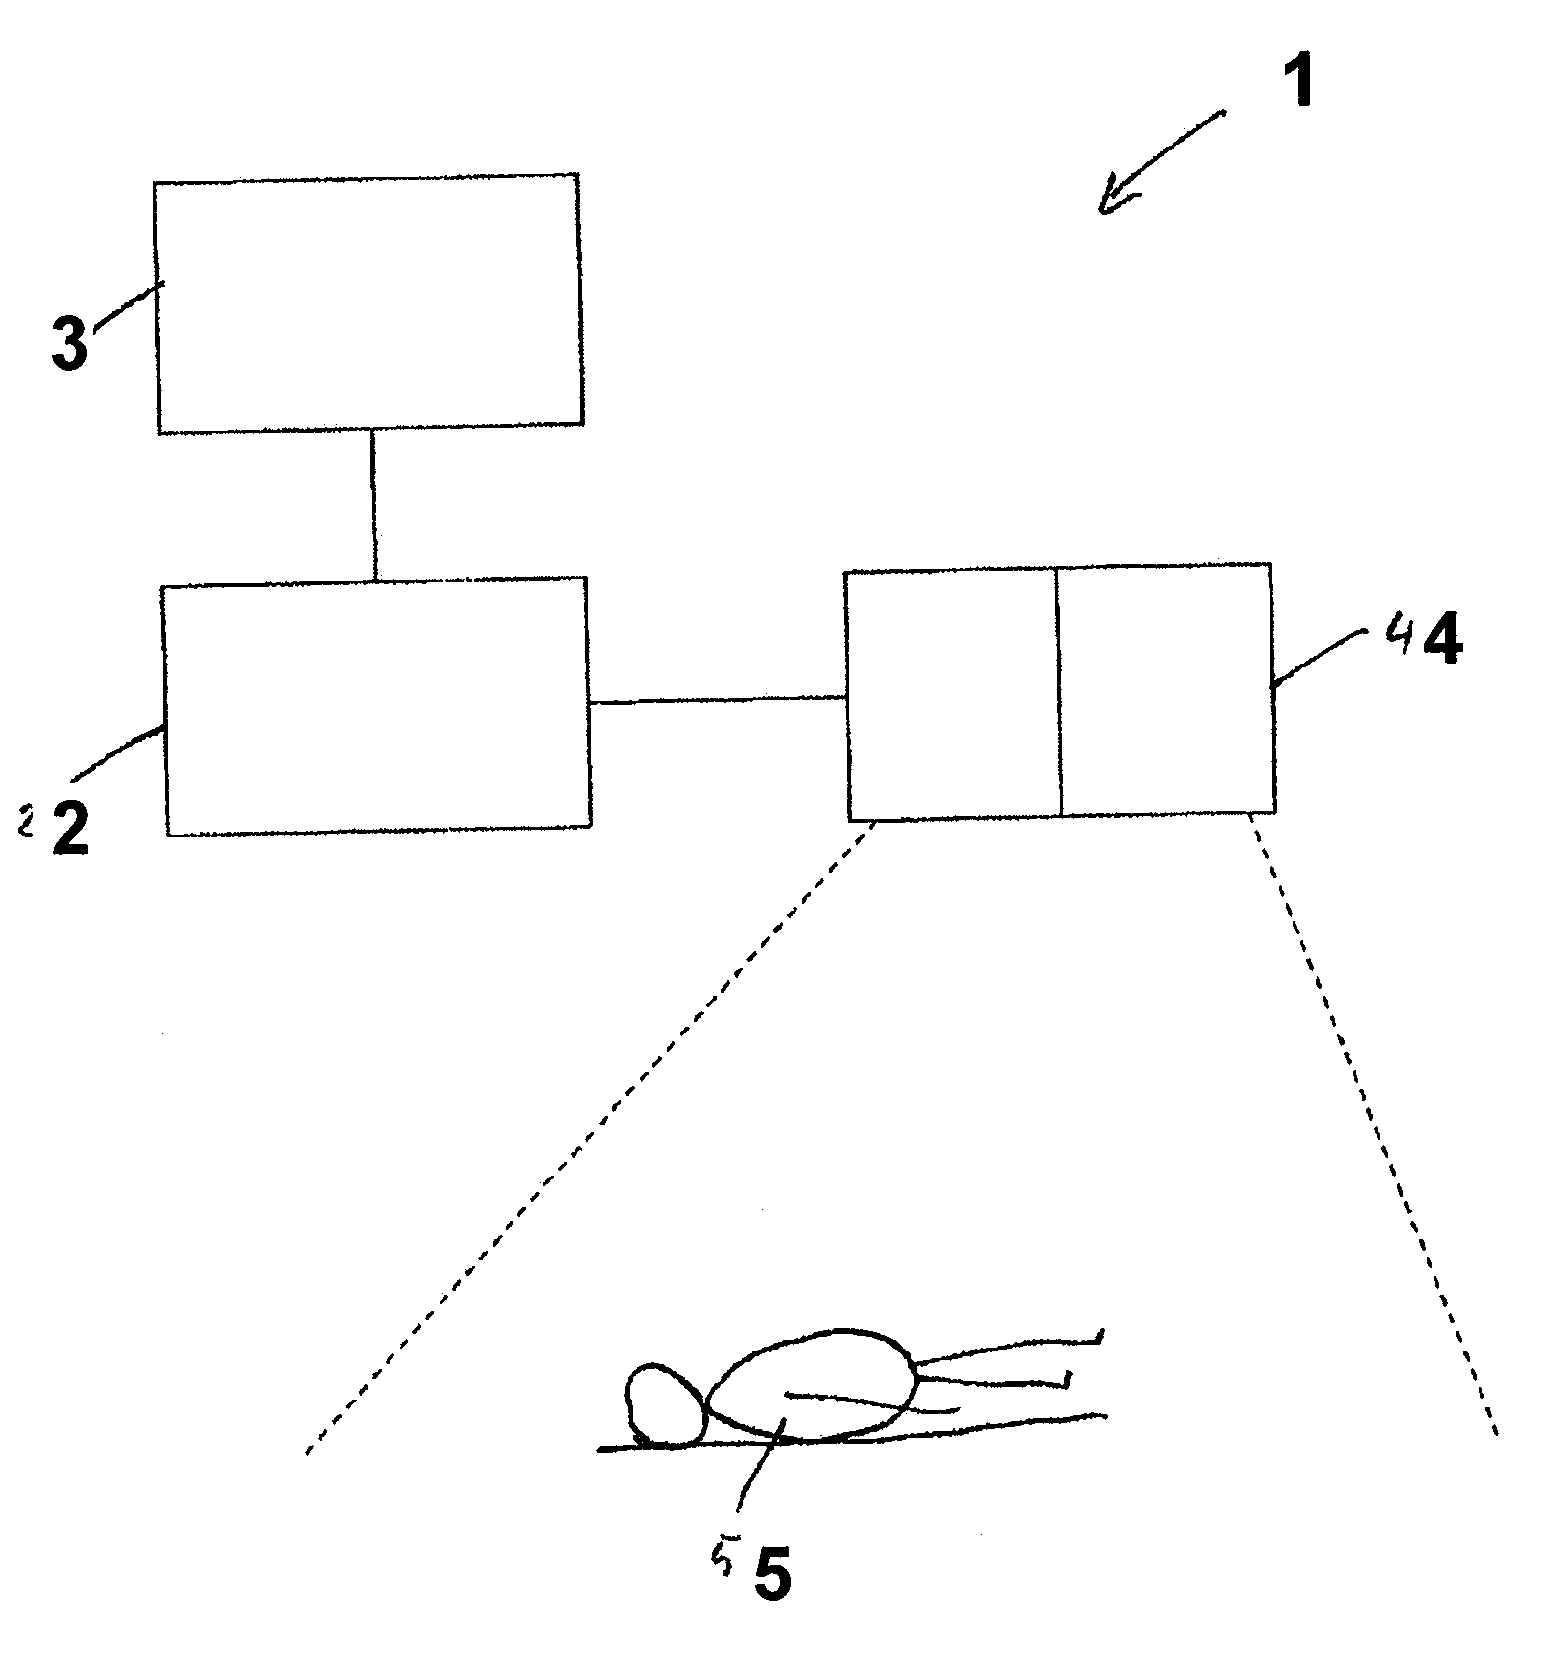 Method for ascertaining the position of a medical instrument in a body